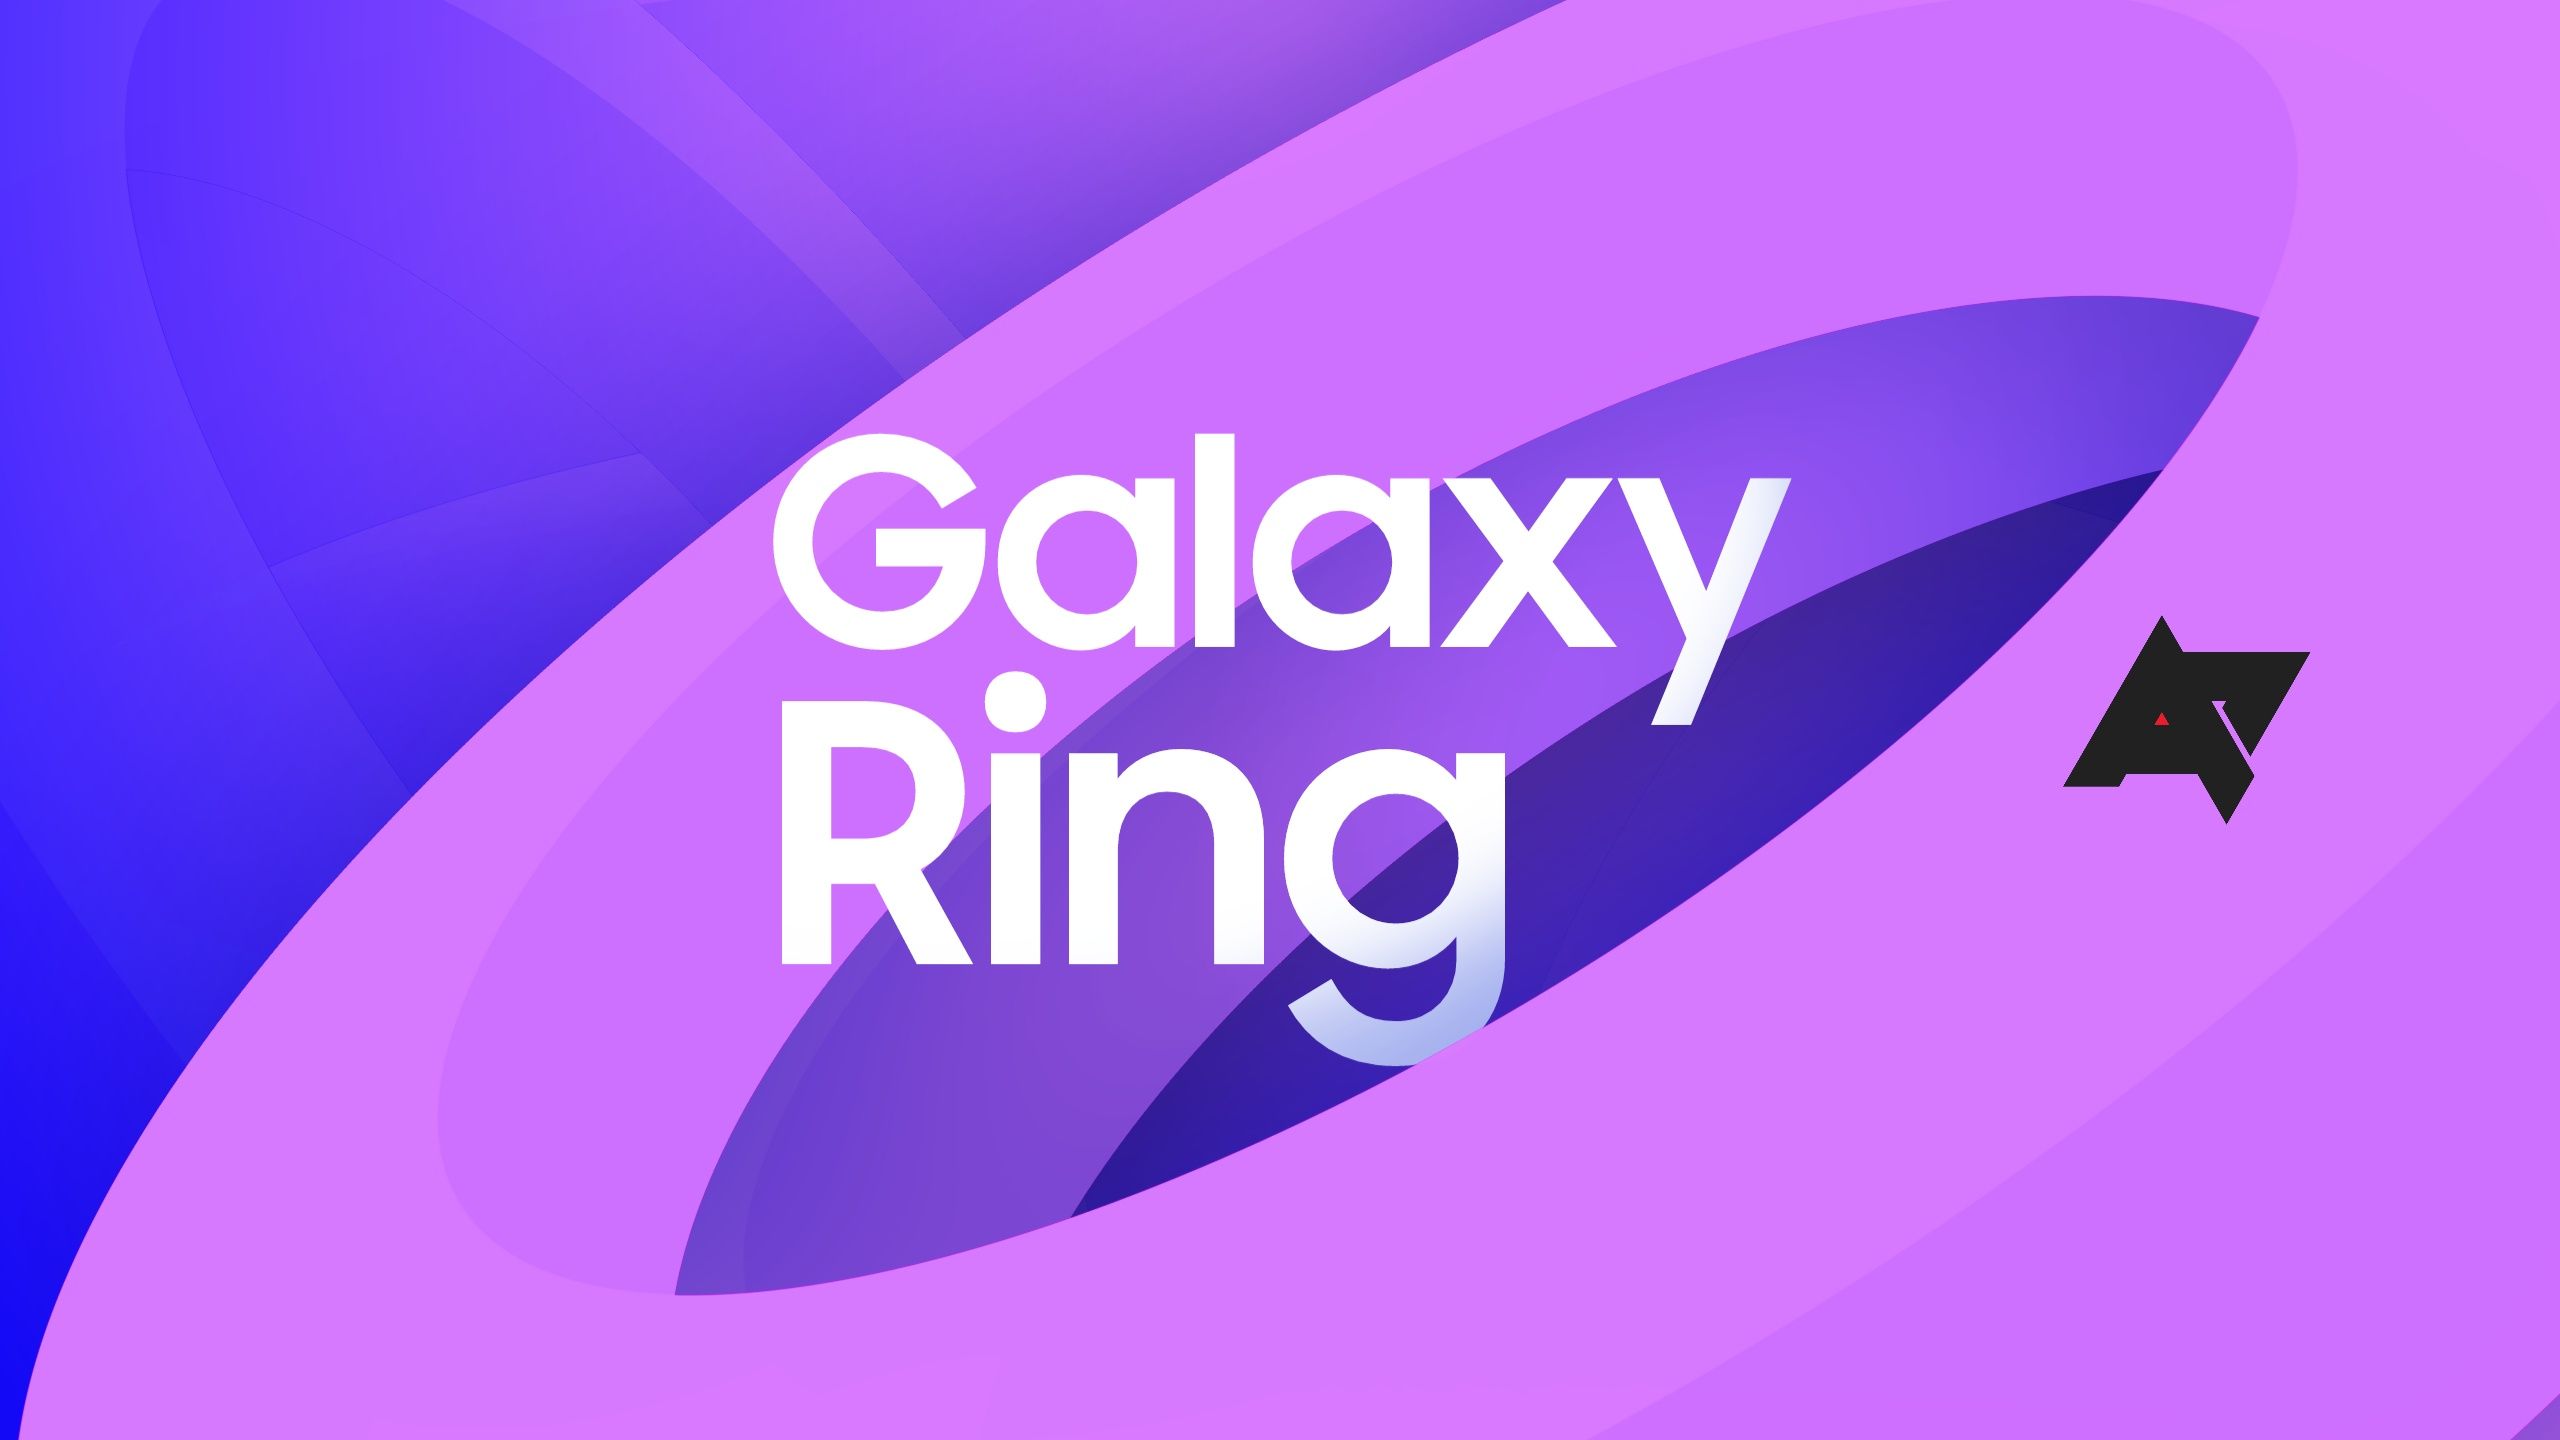 Remember the original Samsung Galaxy Ring? Neither did we